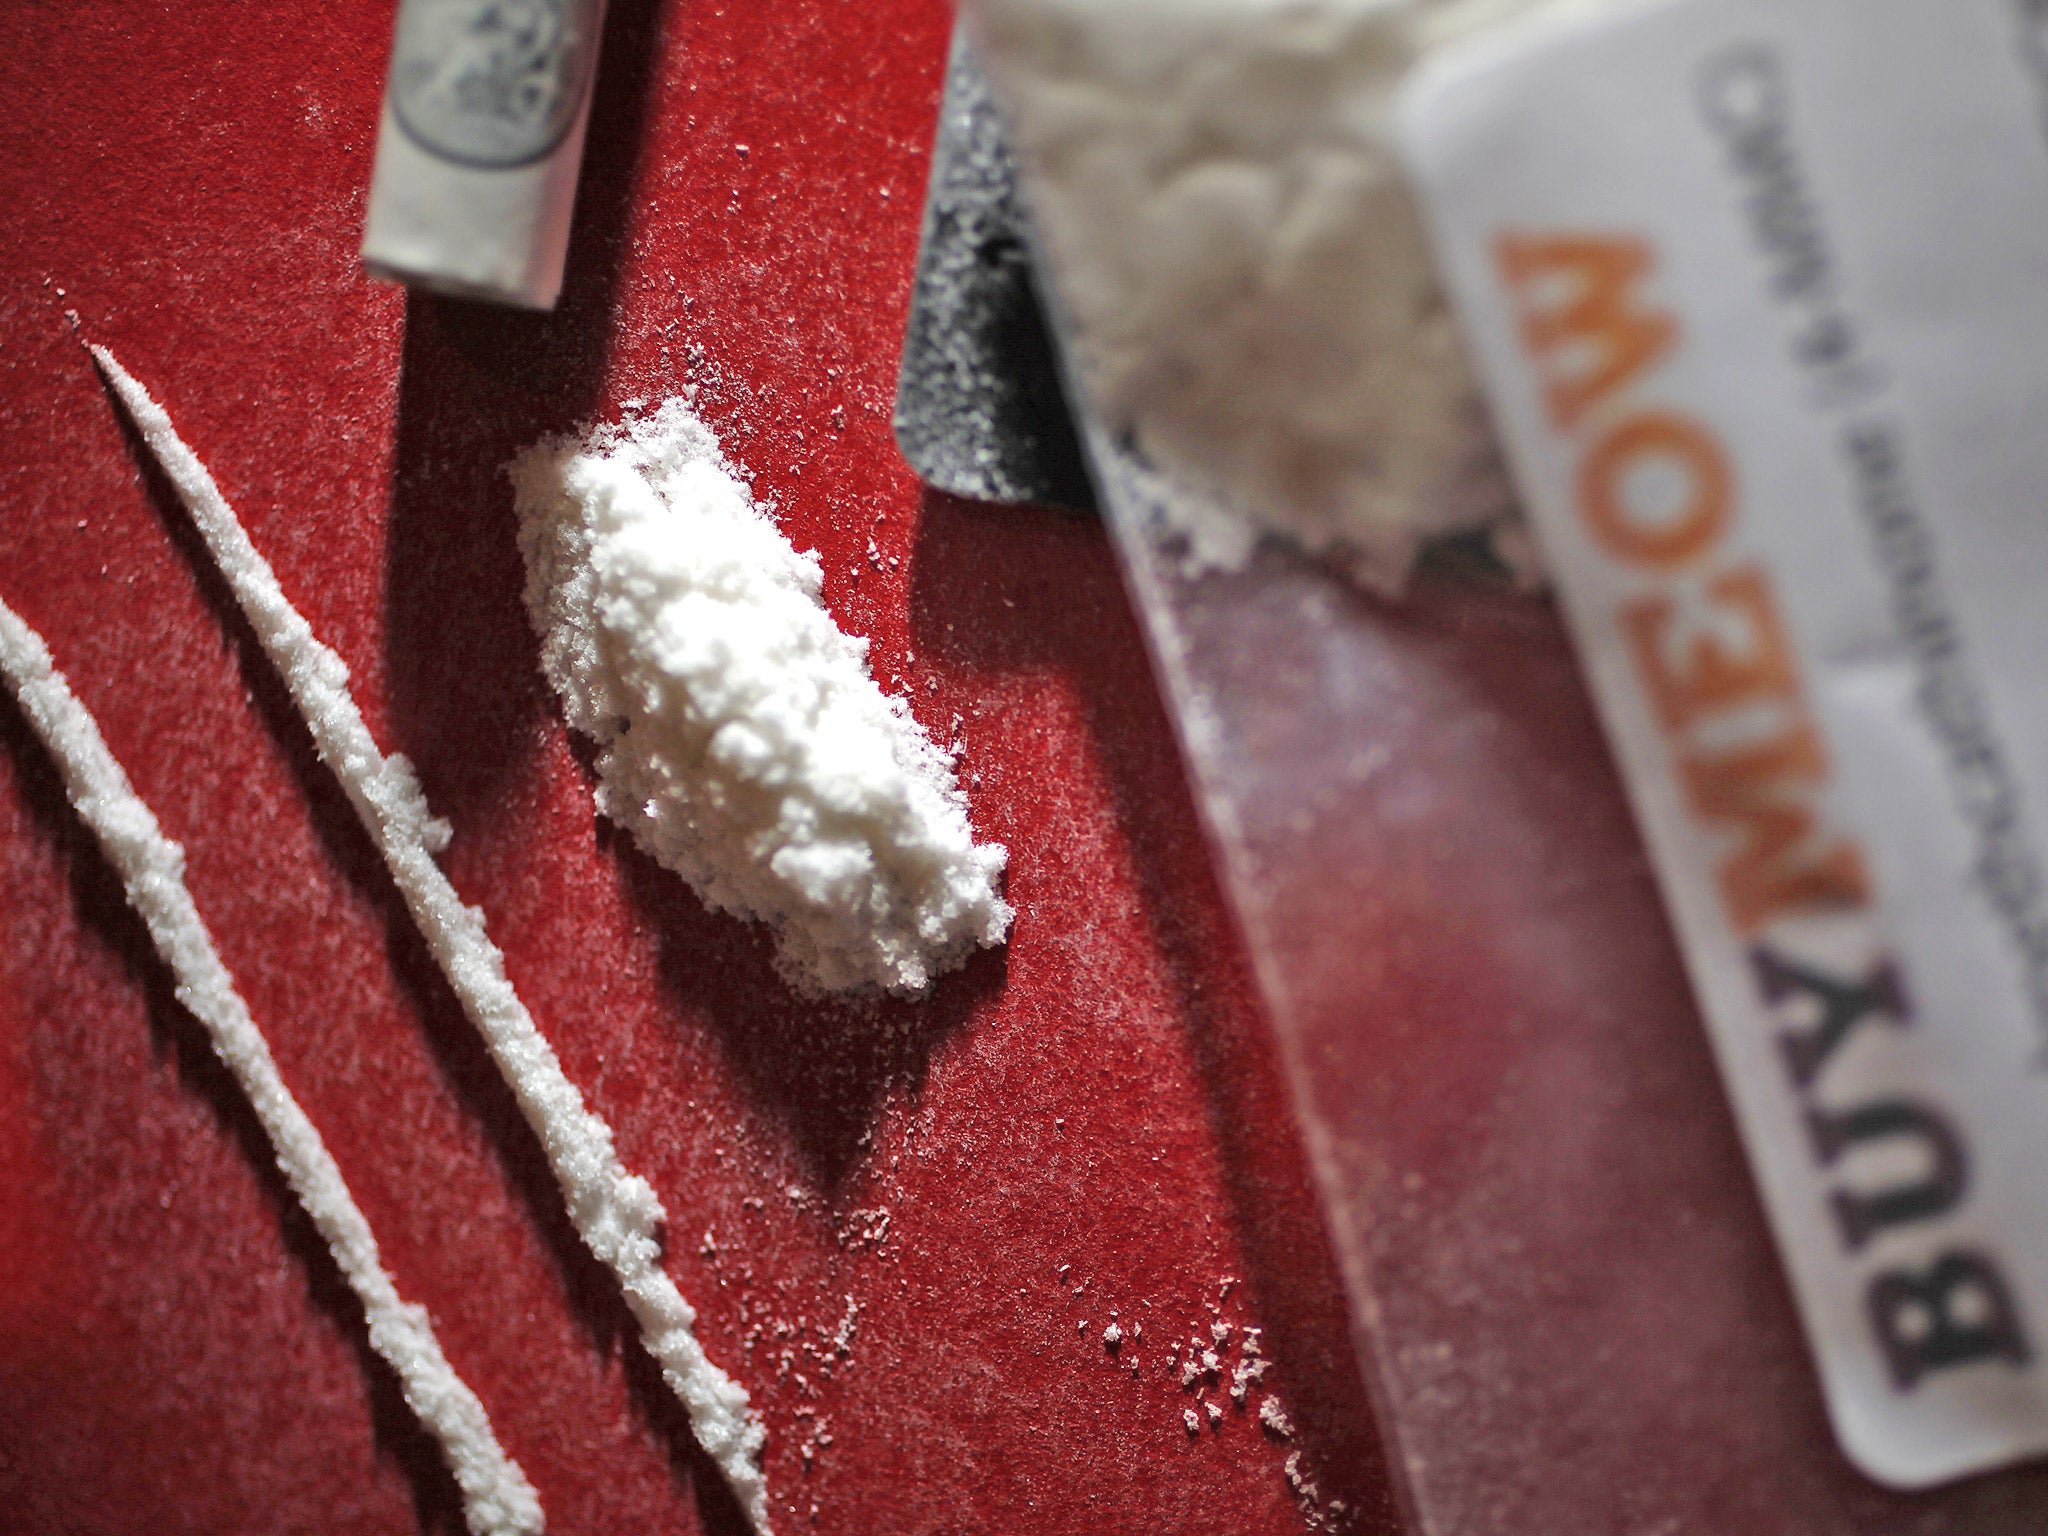 Use of mephedrone, also known as meow meow, is soaring